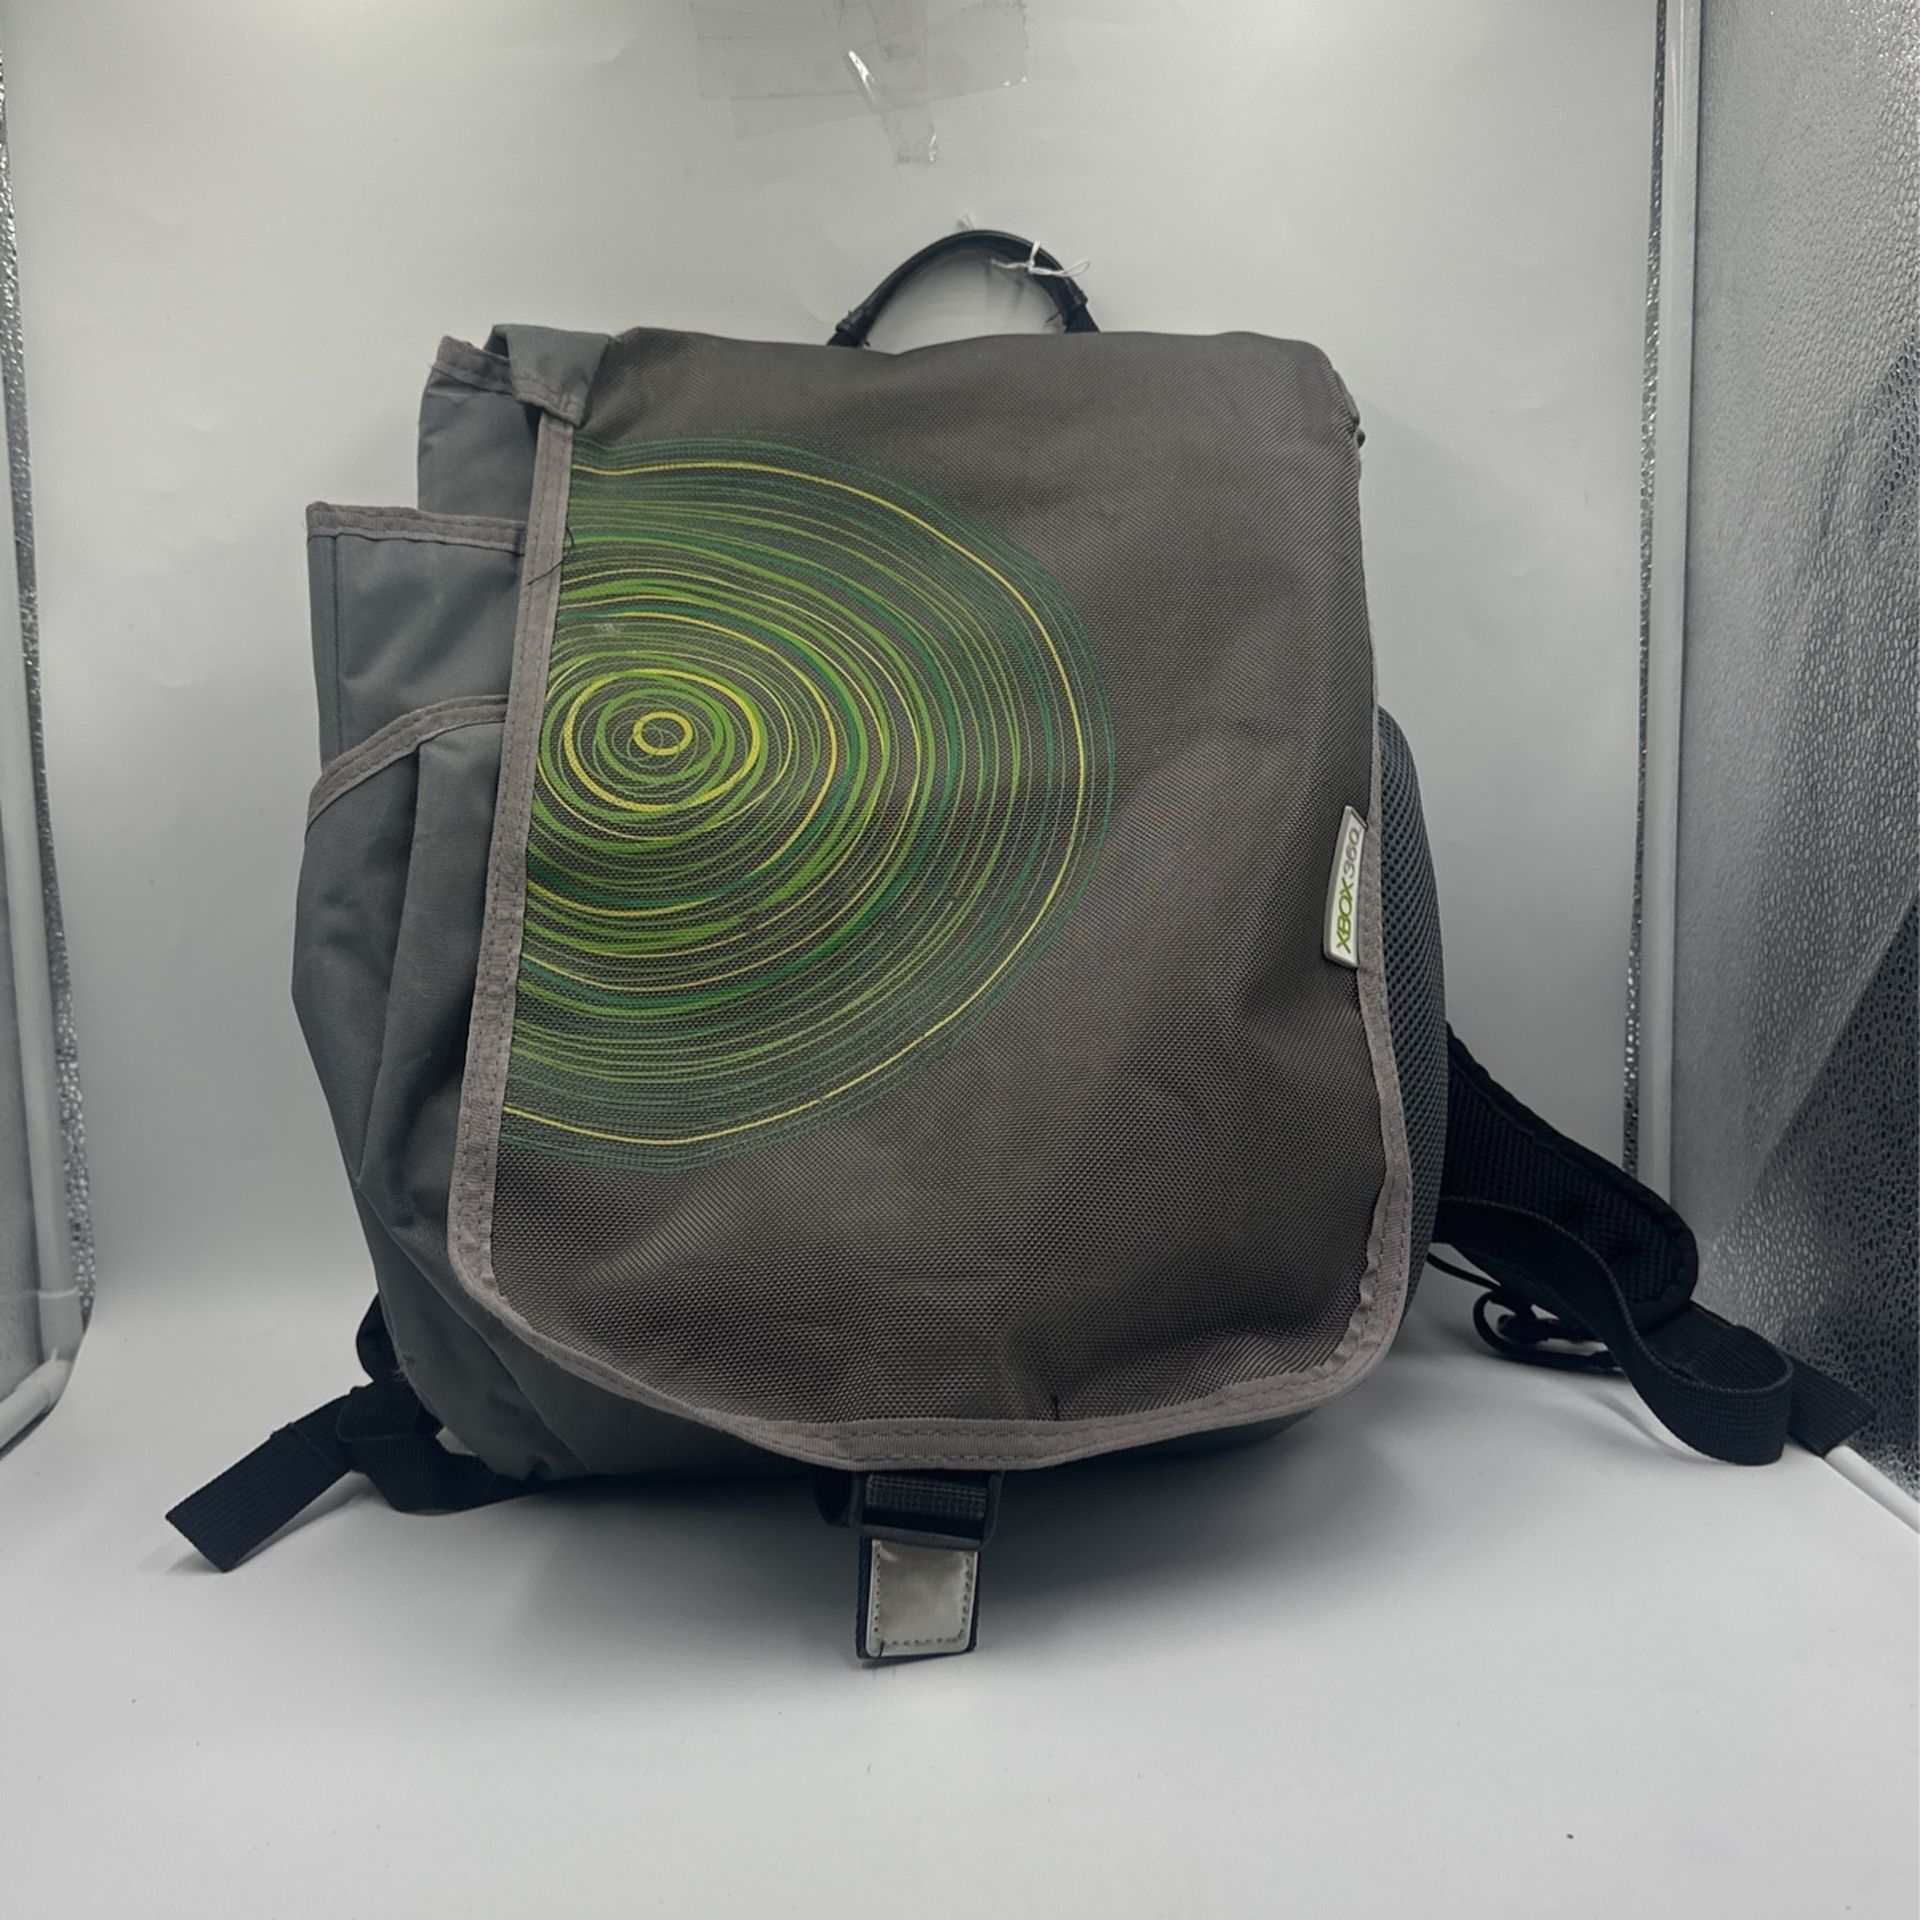  Xbox 360 Backpack Game System Console Carrying Bag 